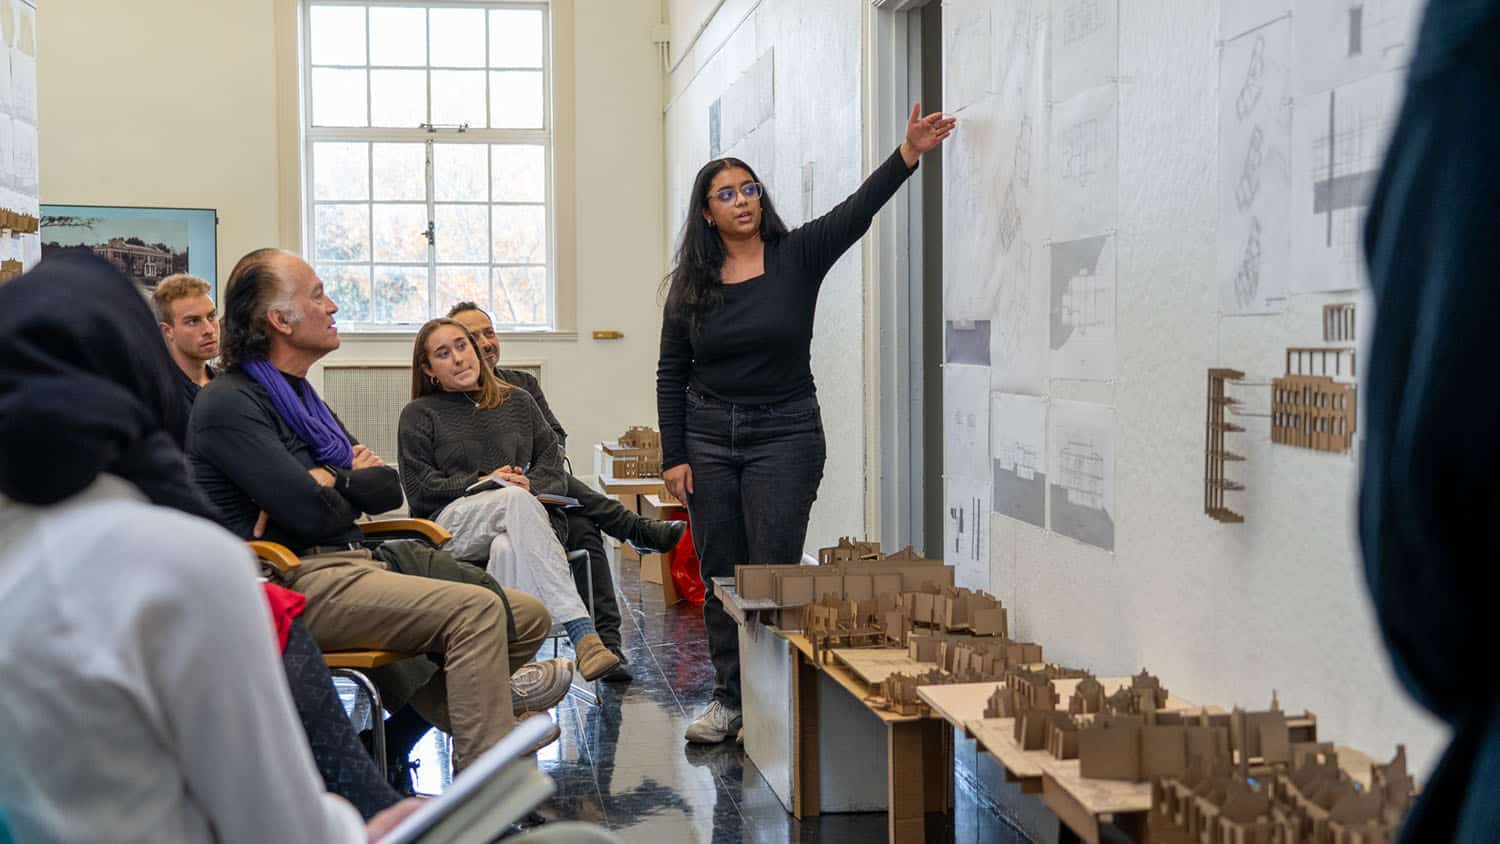 A student points to a set of architectural plans on the wall as she presents a project to an audience of peers and faculty.